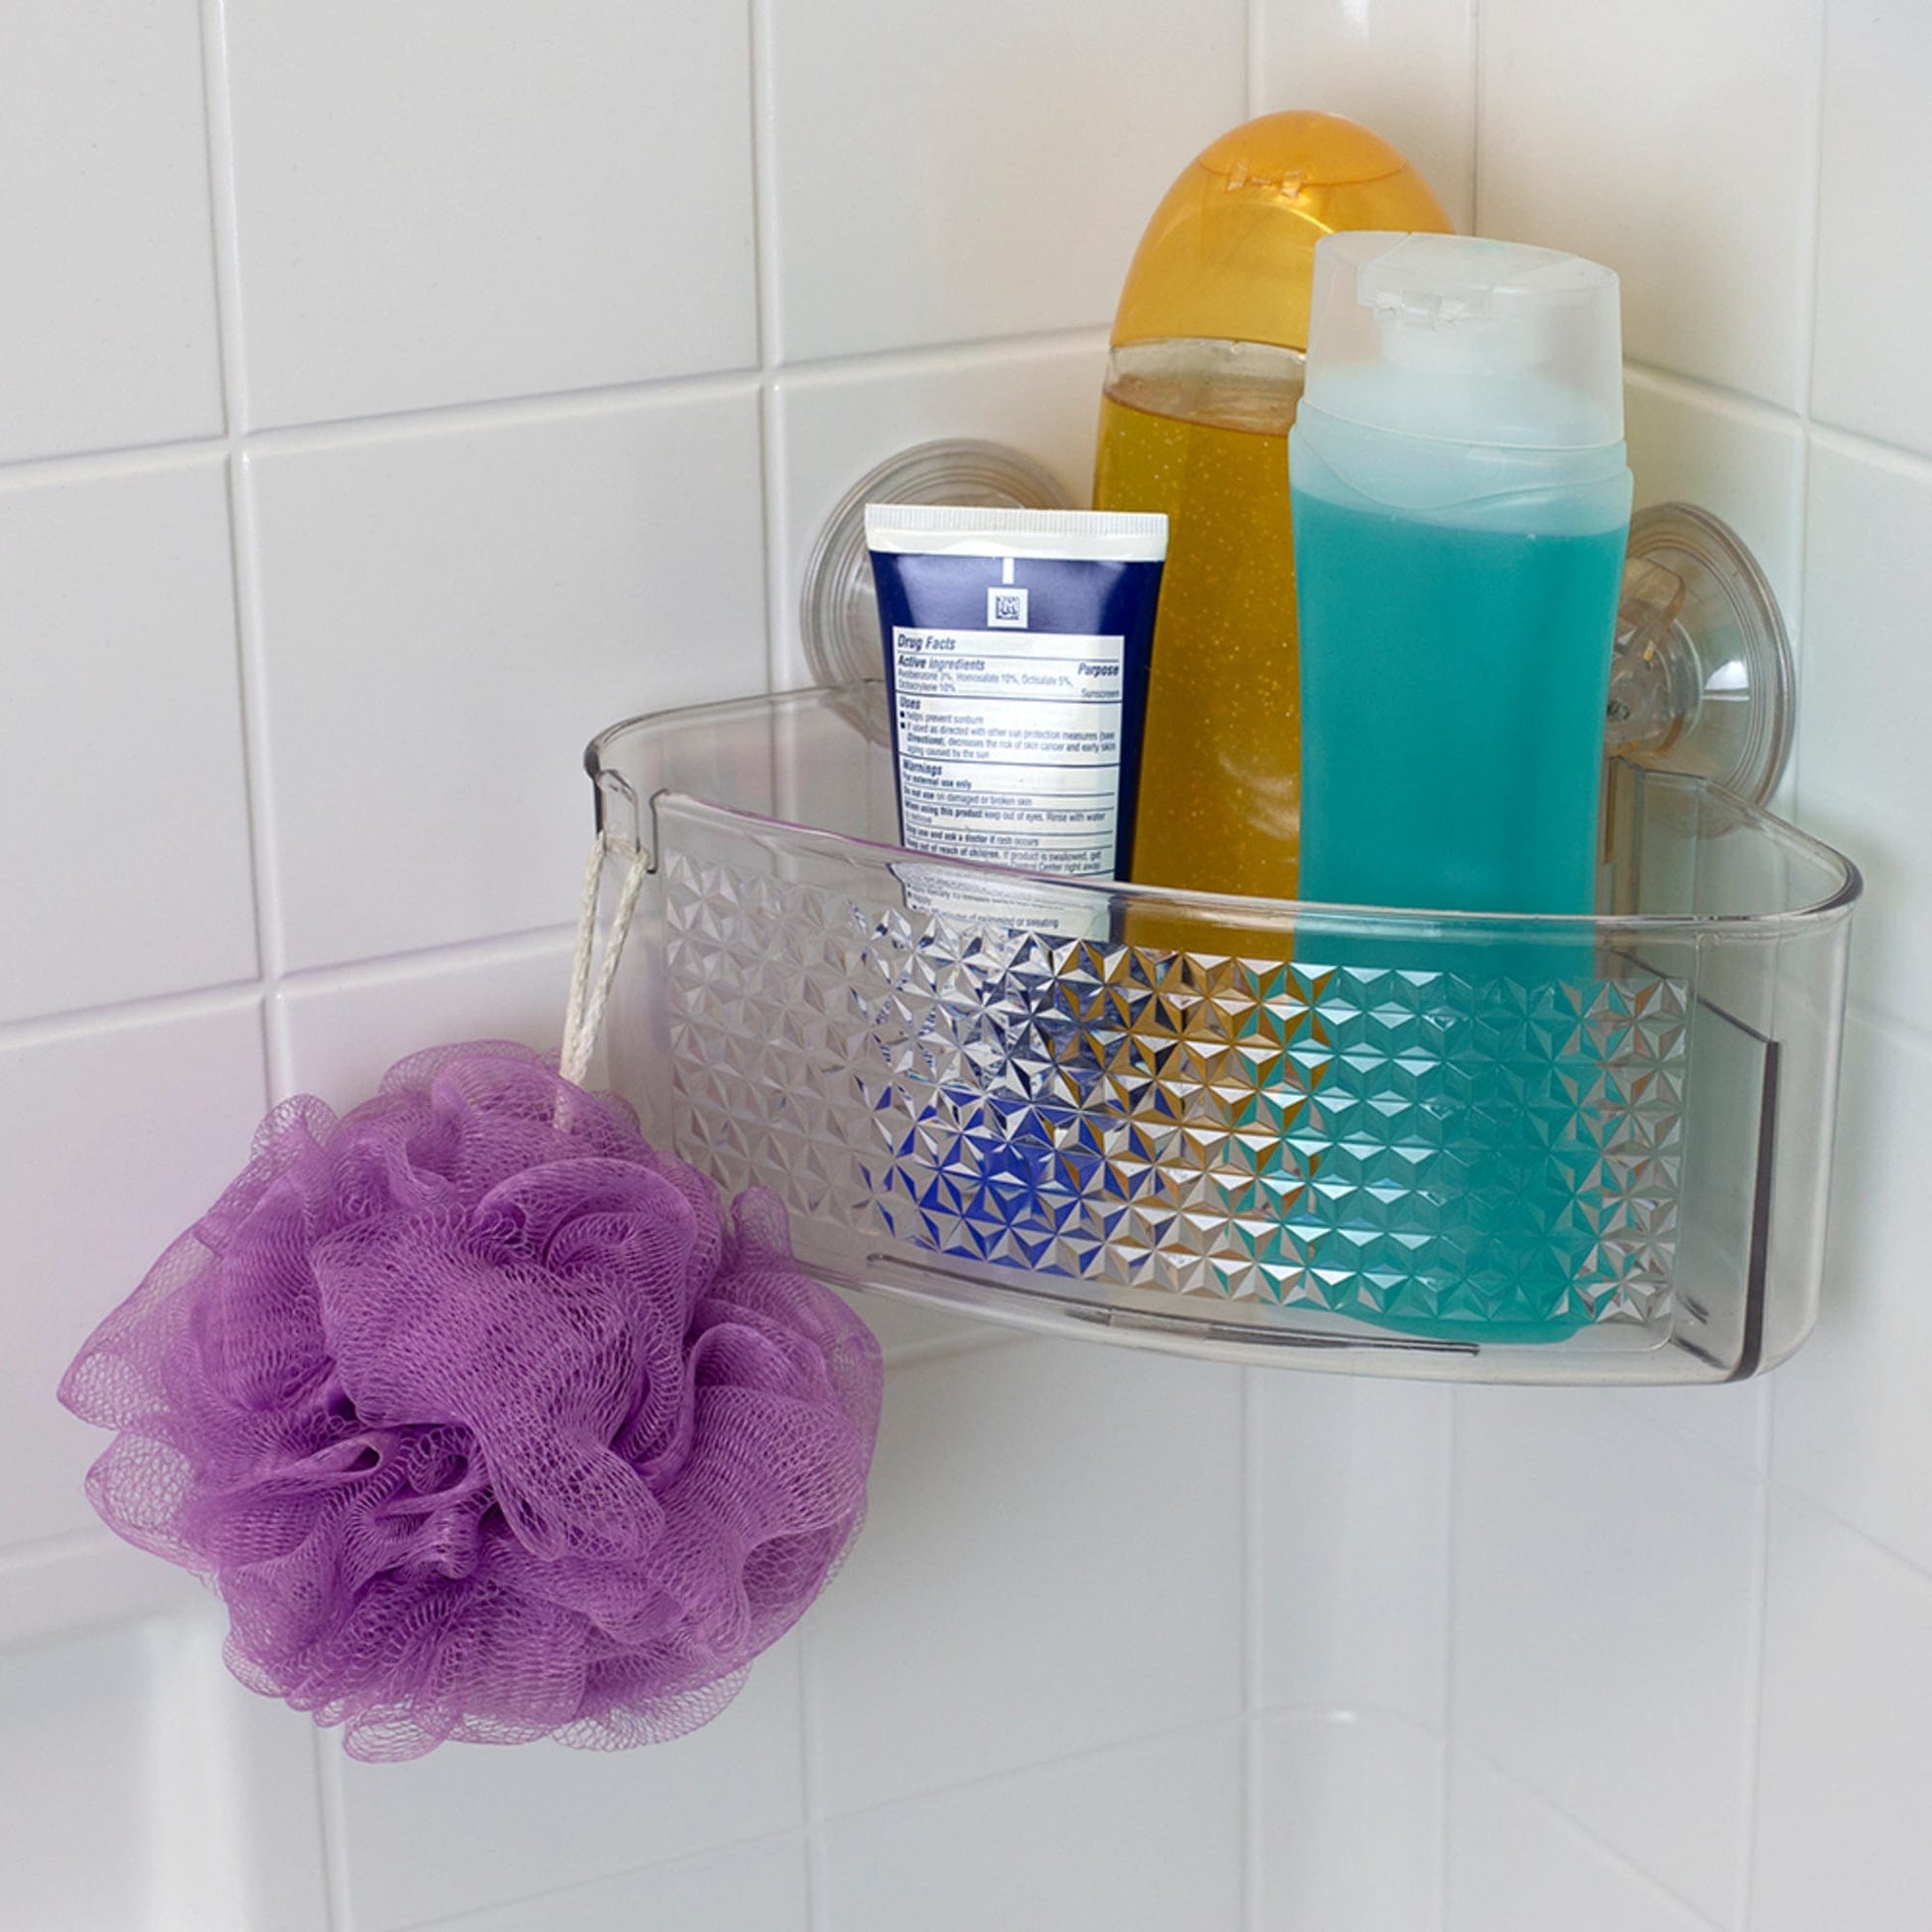 Large Cubic Patterned Plastic Corner Shower Caddy with Suction Cups, Clear, SHOWER, SHOP HOME BASICS